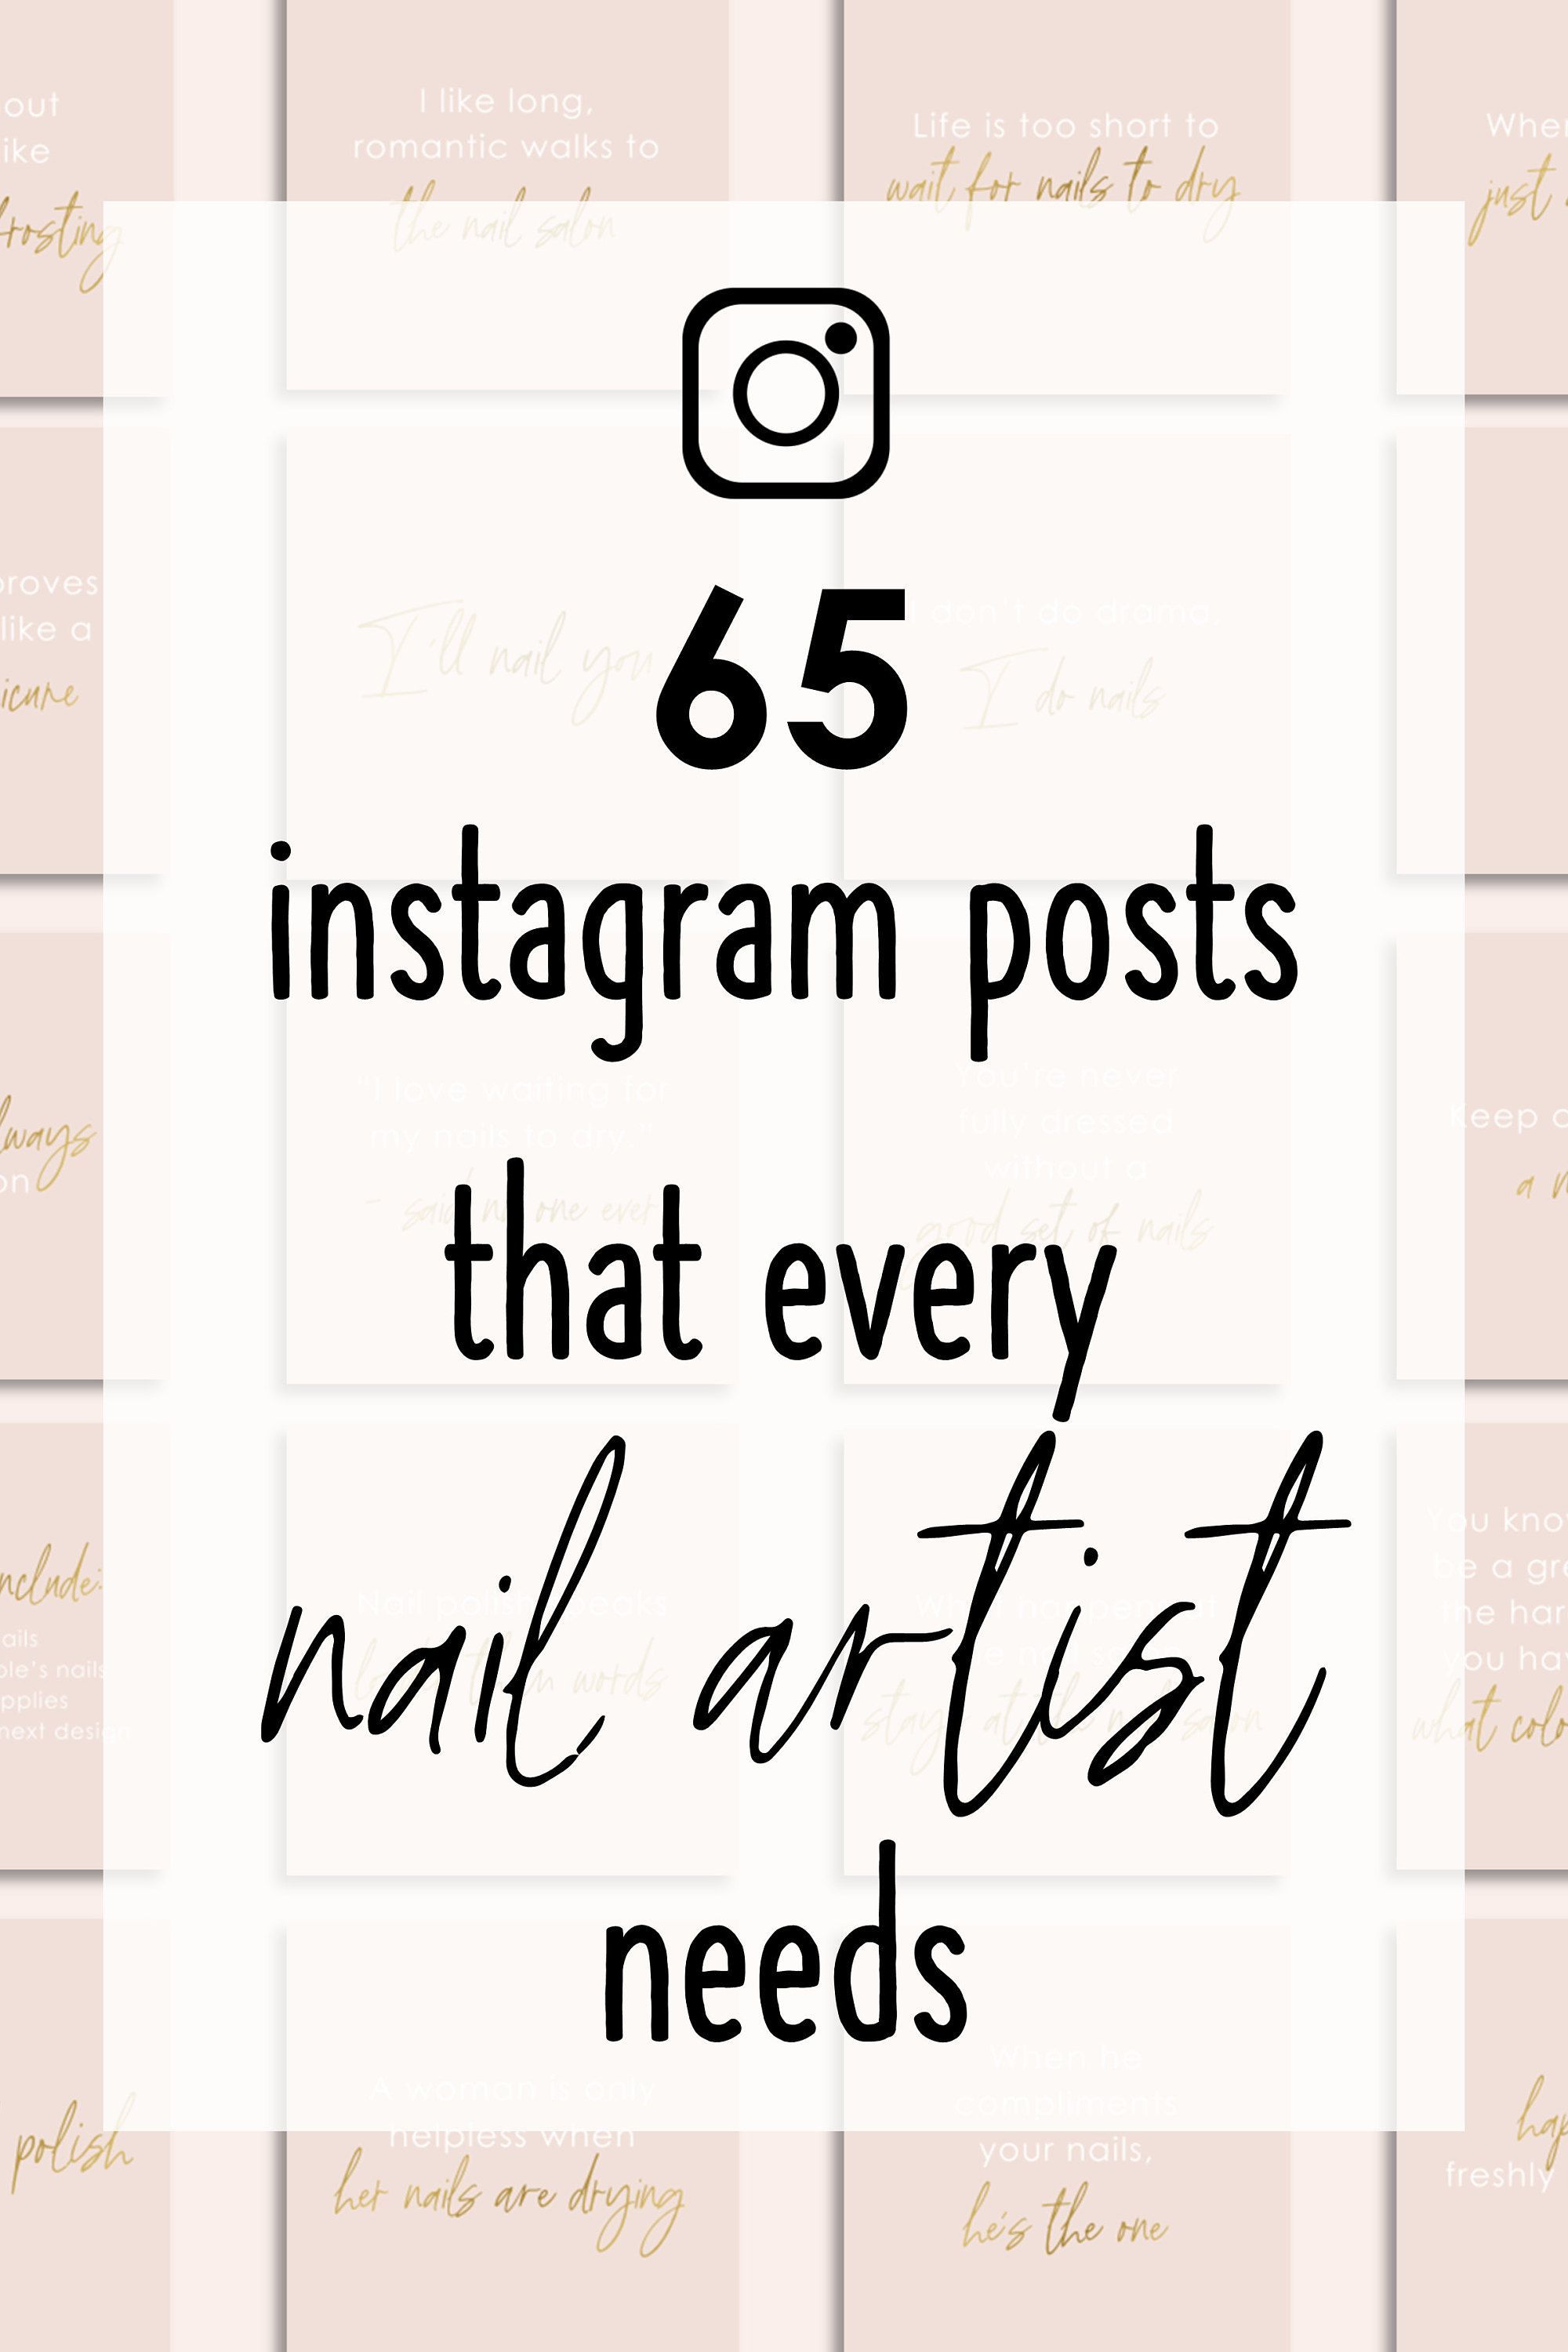 65 Nails Blush and Gold Instagram Posts, Nails Quotes, Social Media Posts, Instagram Nails Templates, Nail Salon Quotes - 65 Nails Blush and Gold Instagram Posts, Nails Quotes, Social Media Posts, Instagram Nails Templates, Nail Salon Quotes -   14 beauty Nails quotes ideas